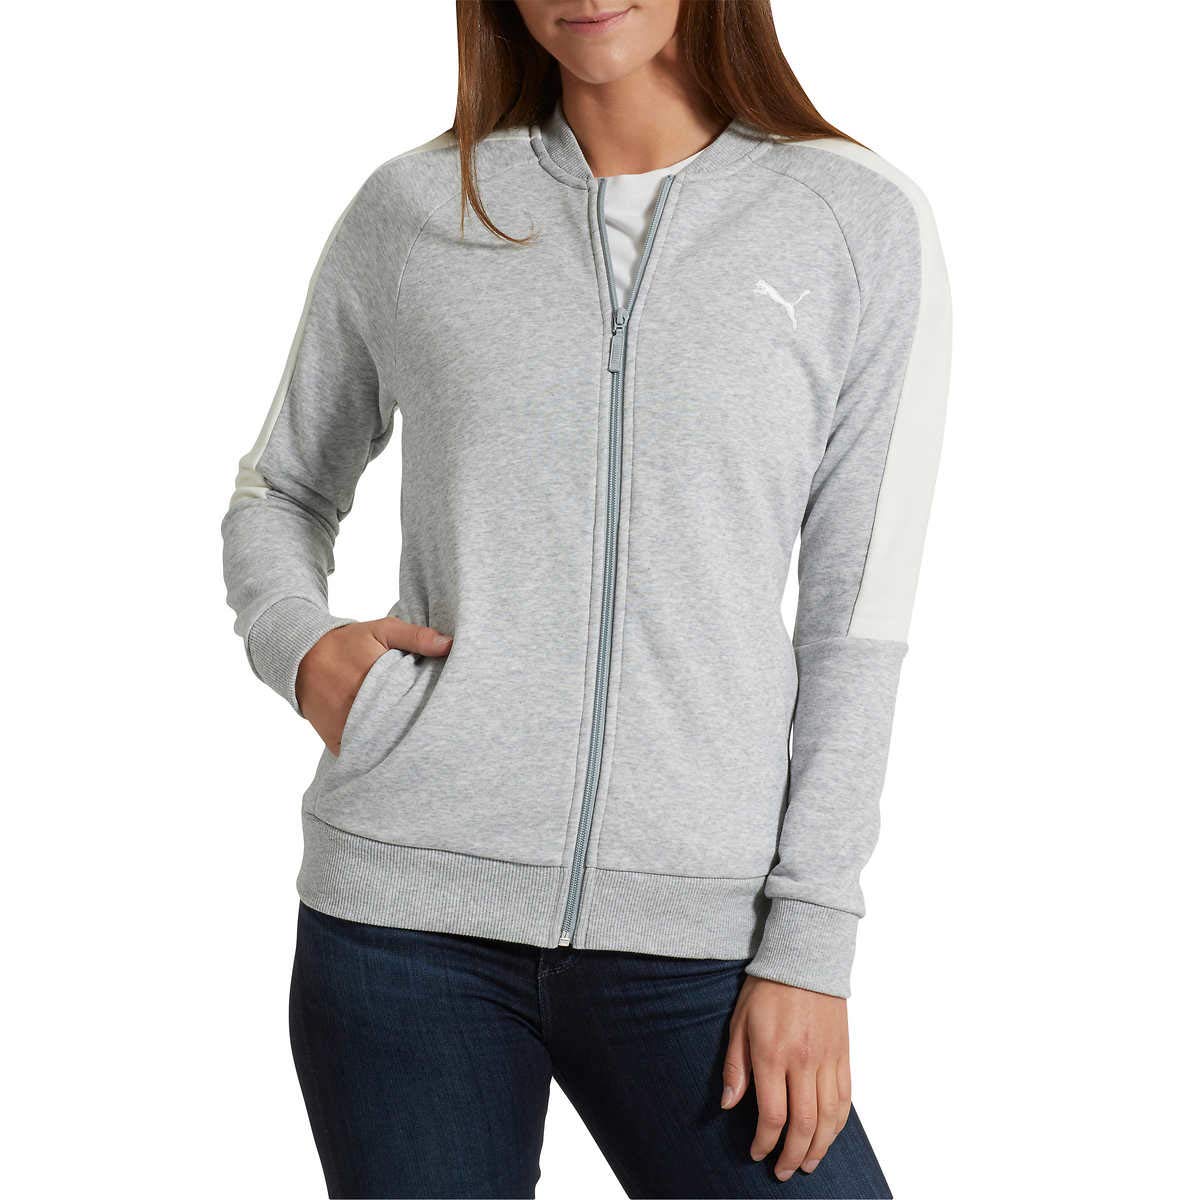 AFC Women's Lightweight Zip-Up Track Style Jacket 4 Great Colors & Piping Trim 